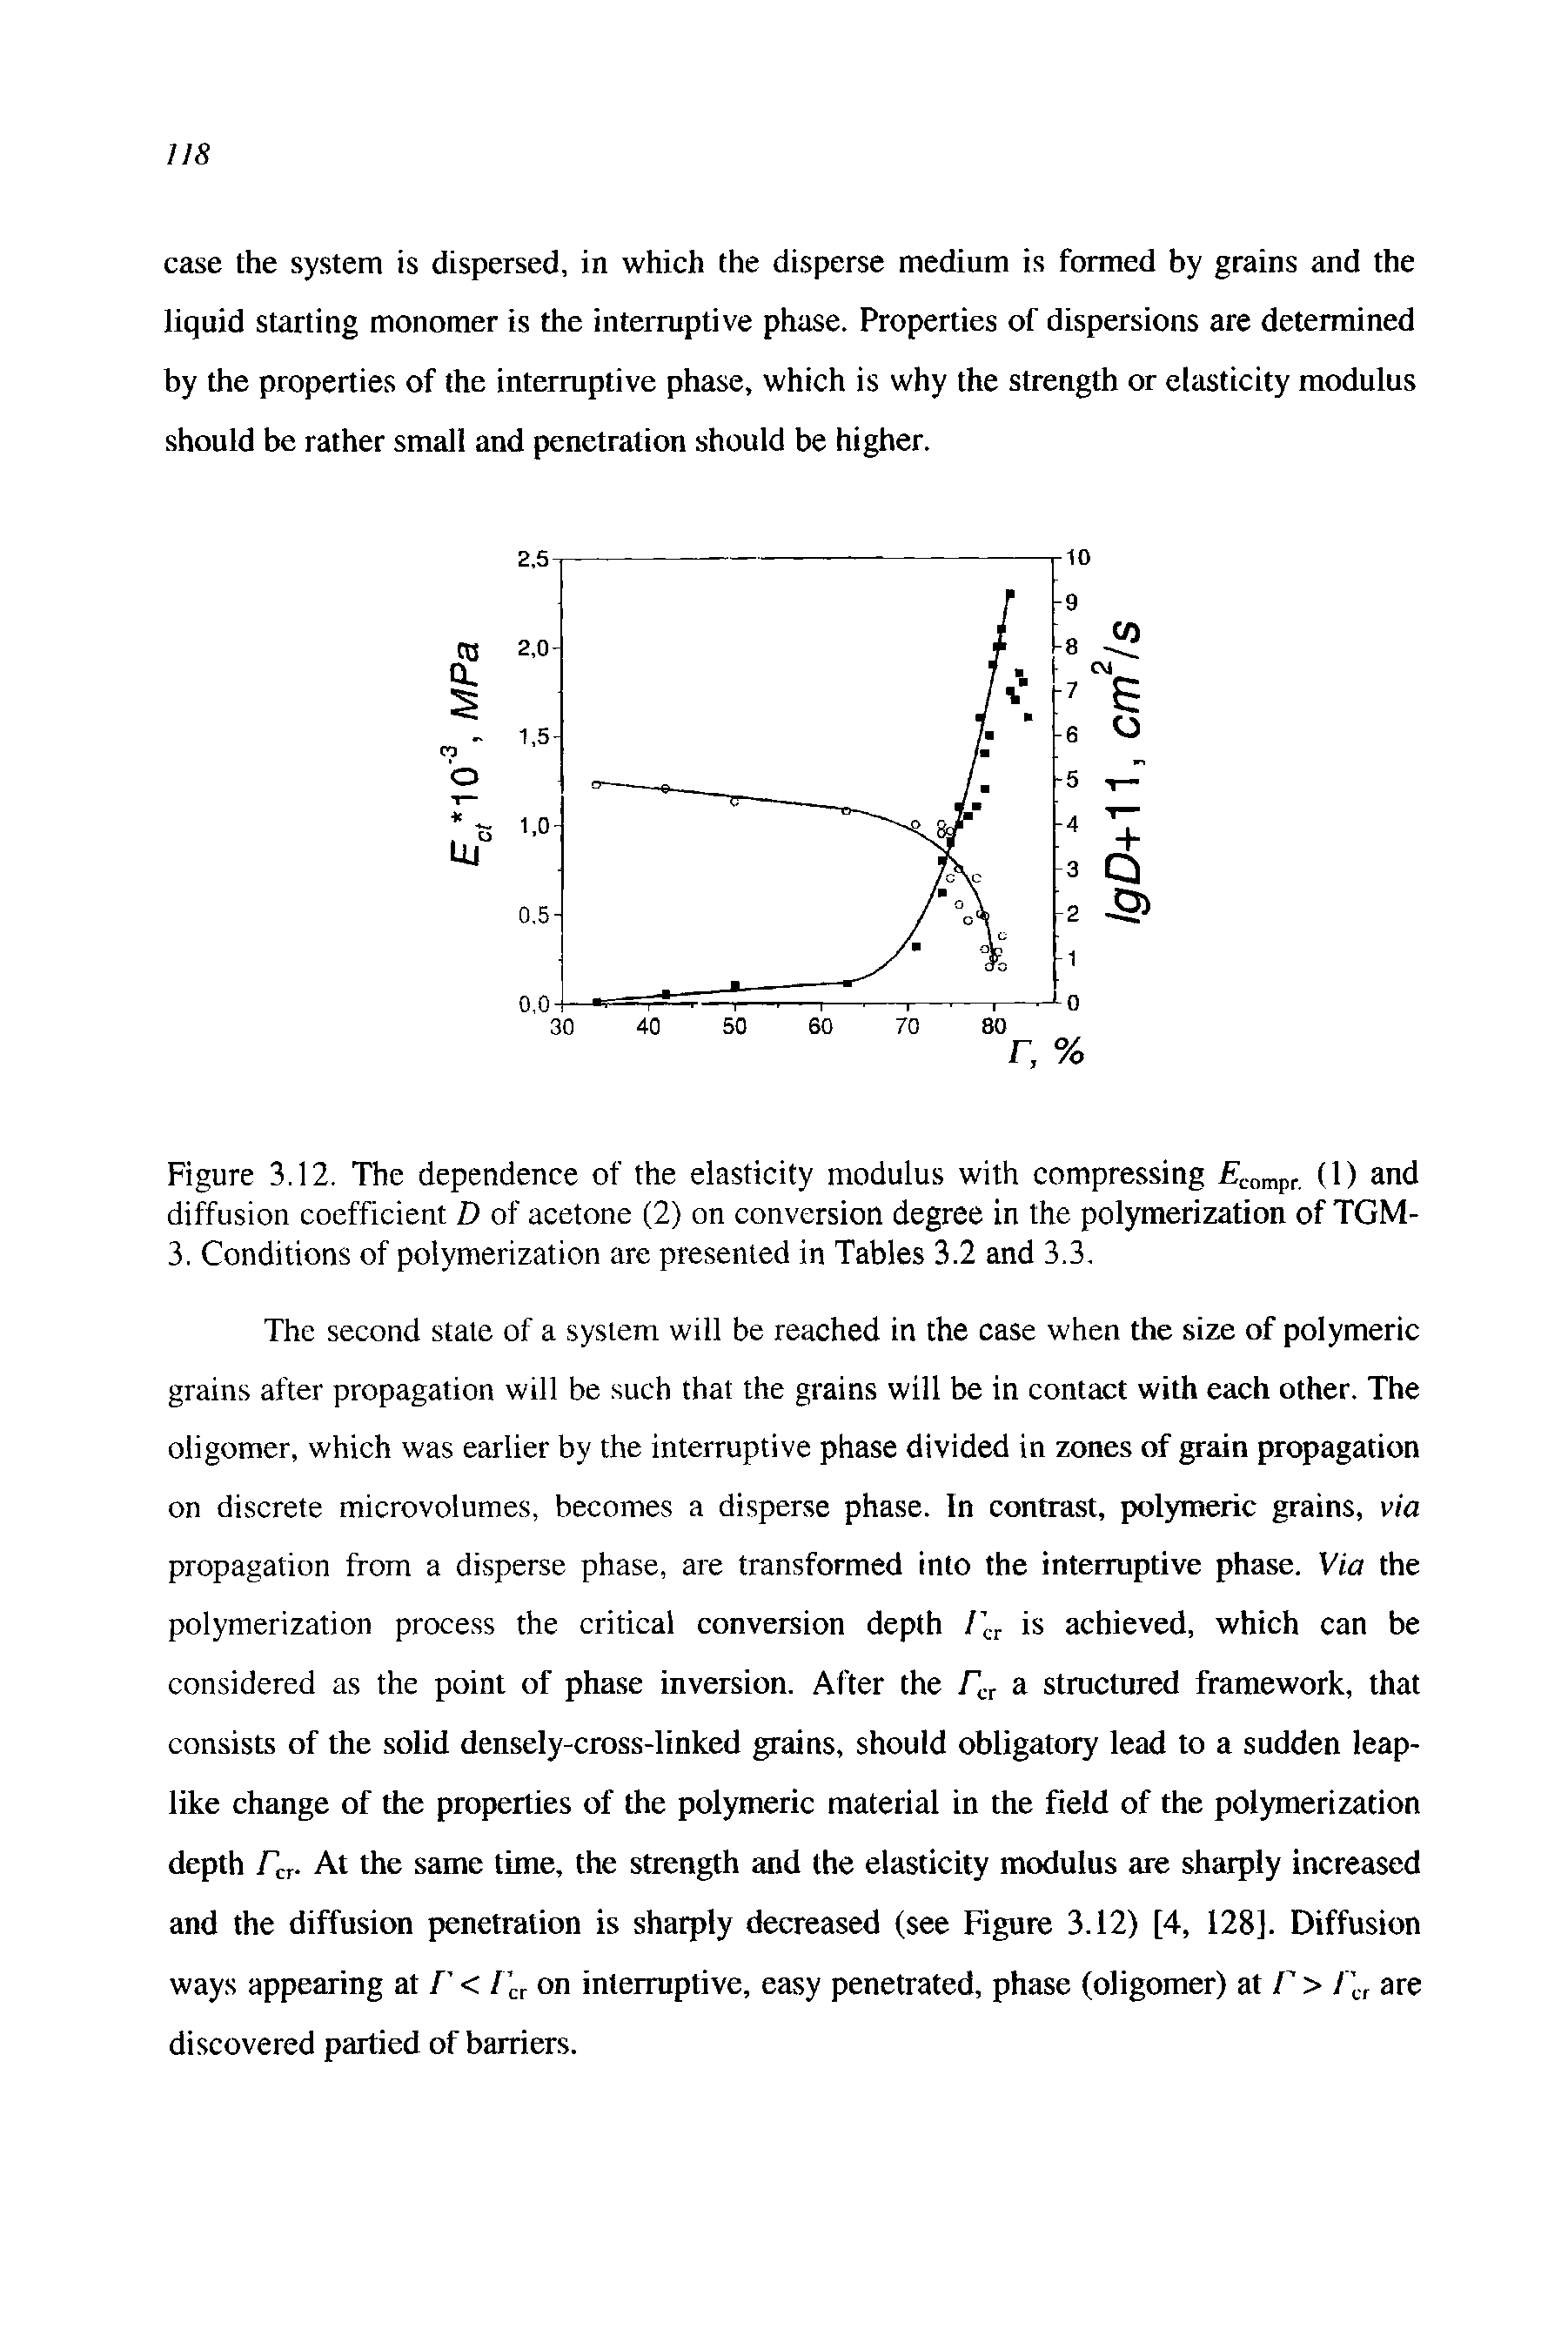 Figure 3.12. The dependence of the elasticity modulus with compressing compr. d) and diffusion coefficient D of acetone (2) on conversion degree in the polymerization of TGM-3. Conditions of polymerization are presented in Tables 3.2 and 3.3.